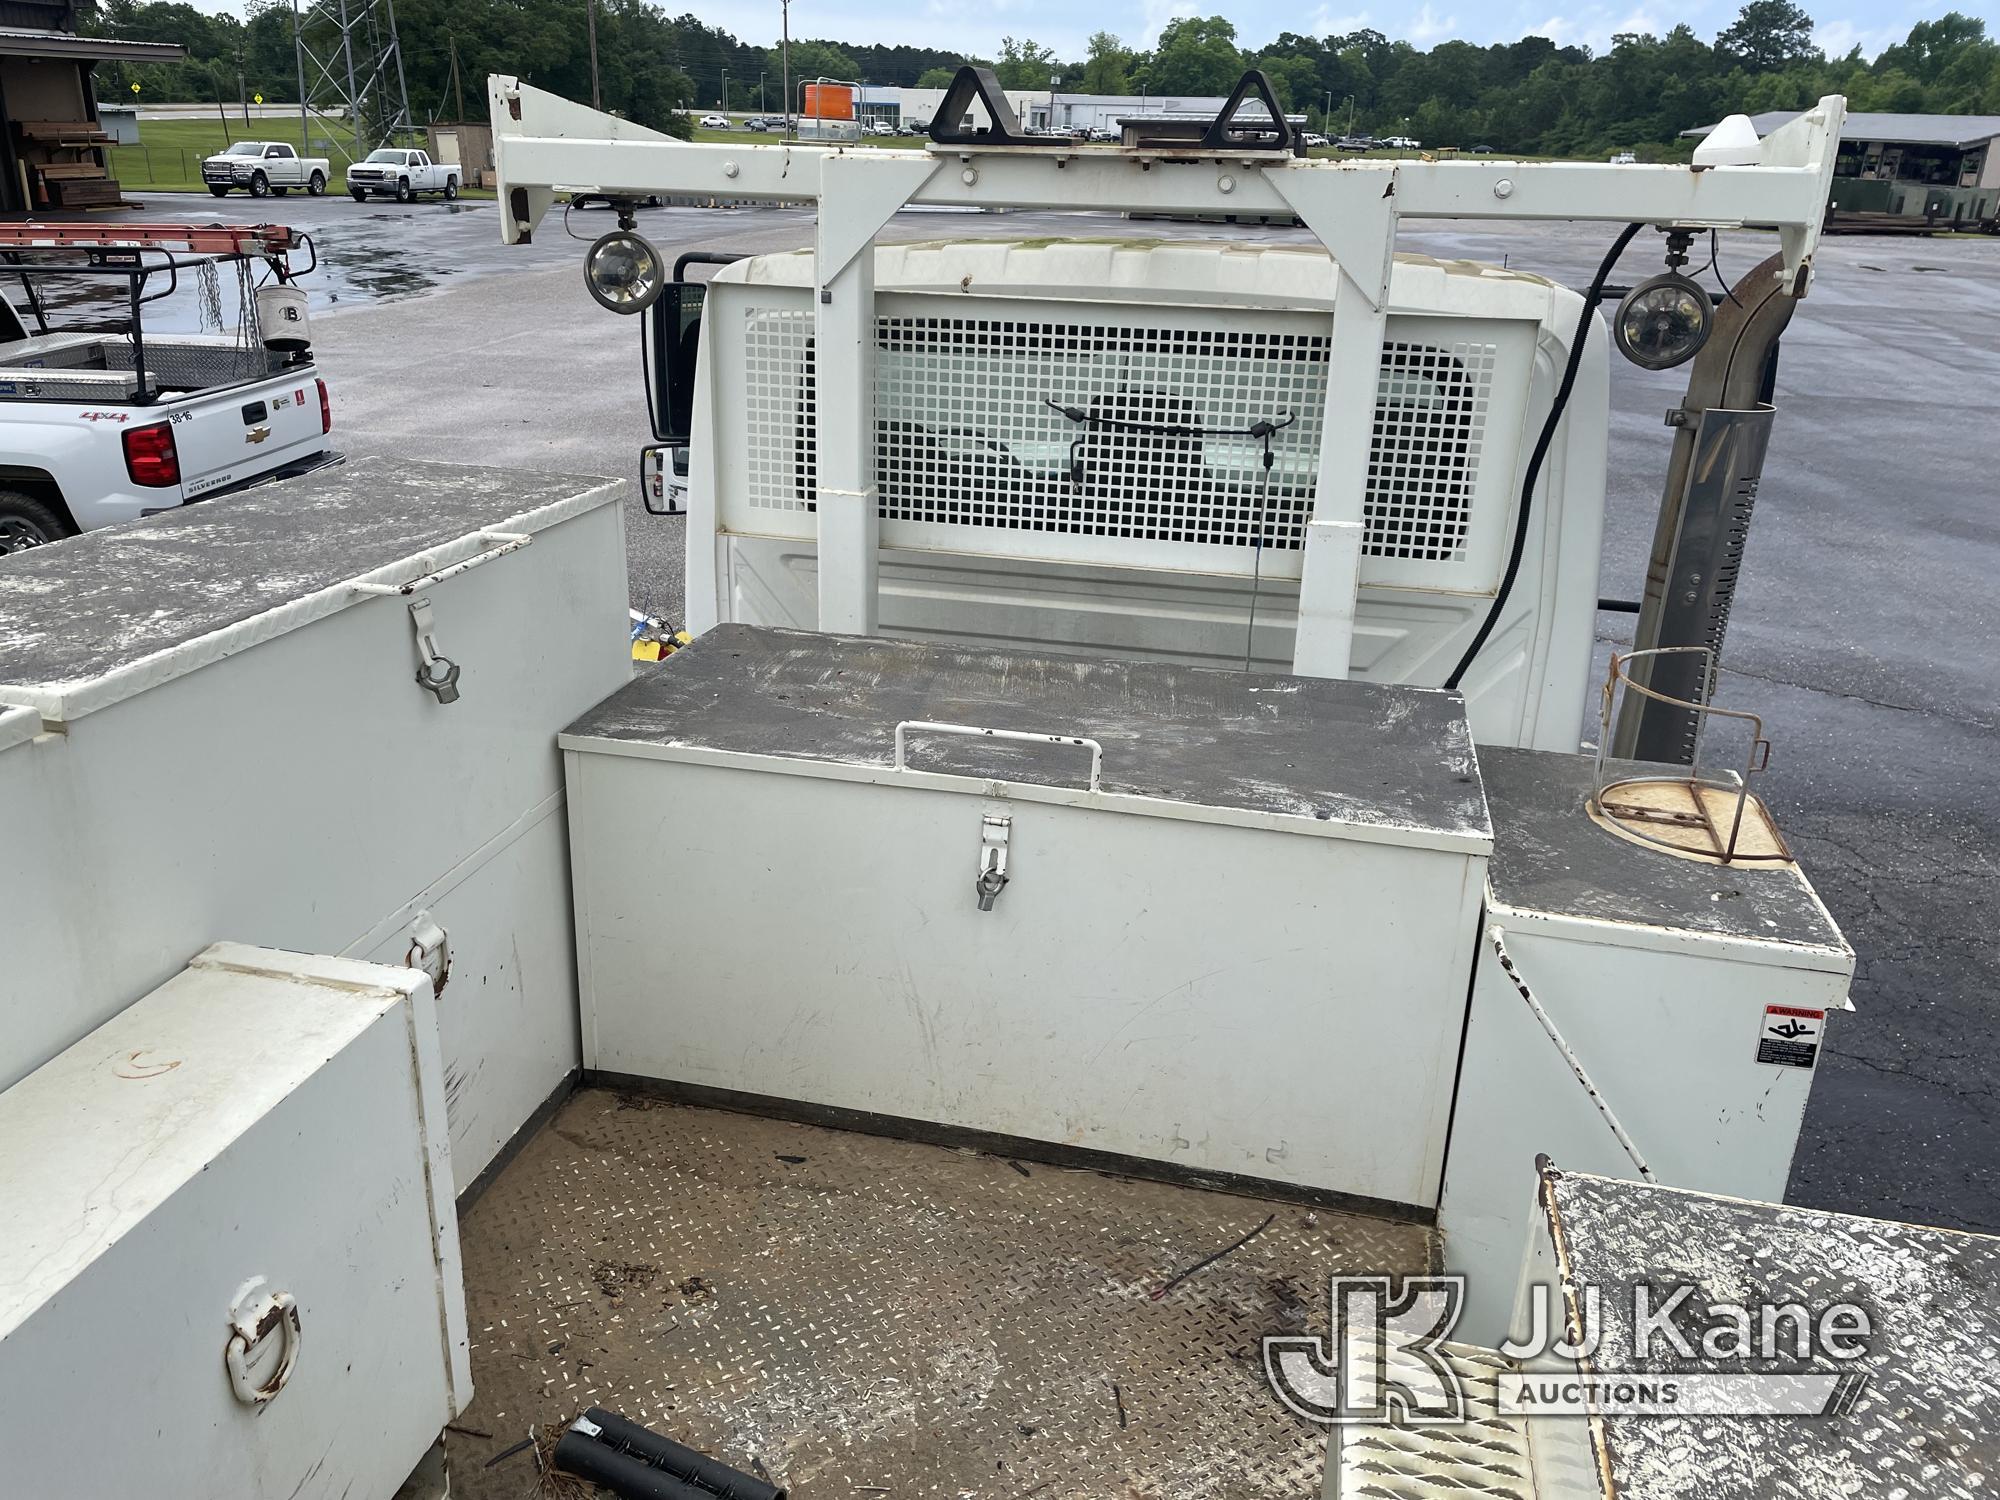 (Andalusia, AL) Altec AA60E, Material Handling Bucket rear mounted on 2009 International 7400 Utilit